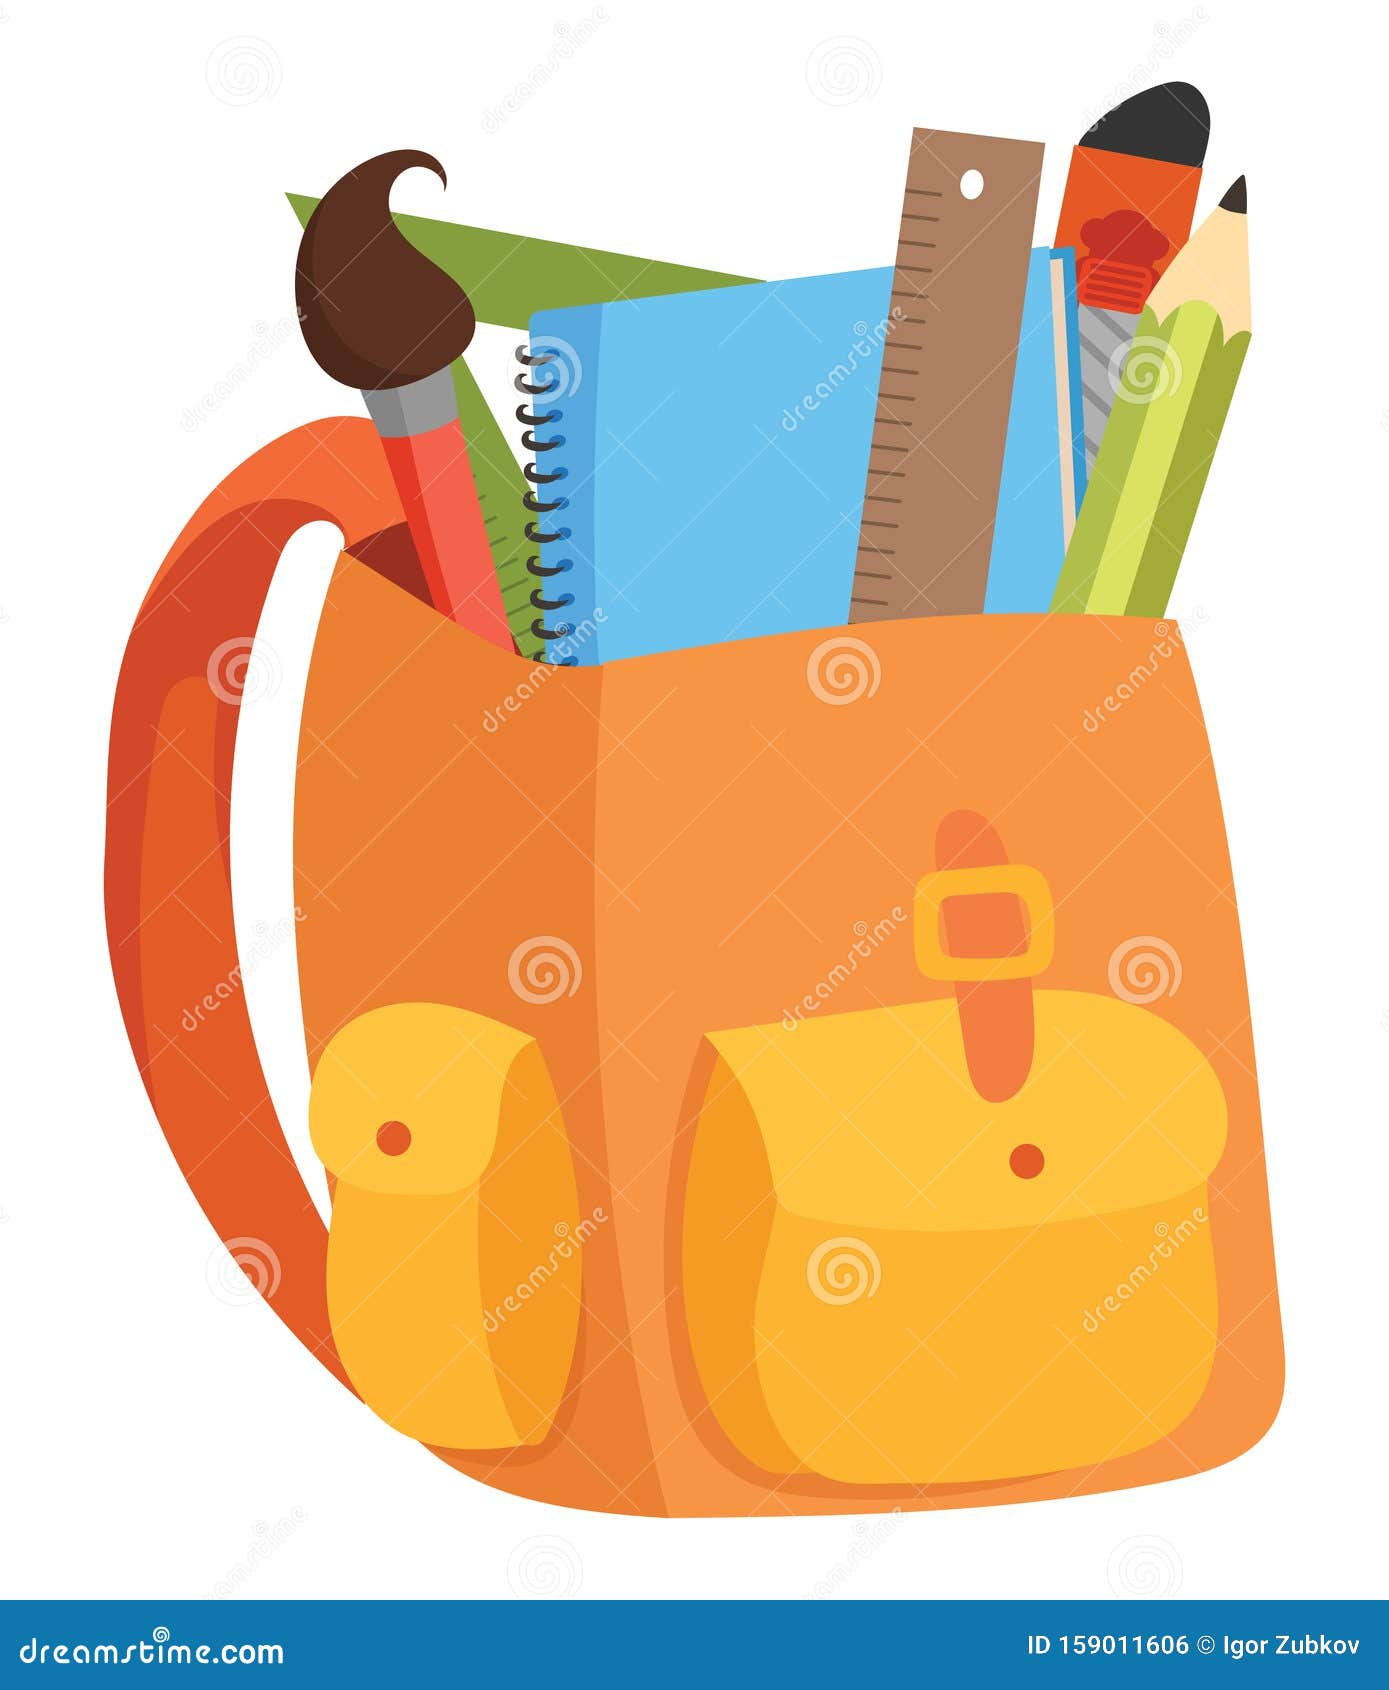 Cartoon Illustration of a School Bag with Accessories for the School ...